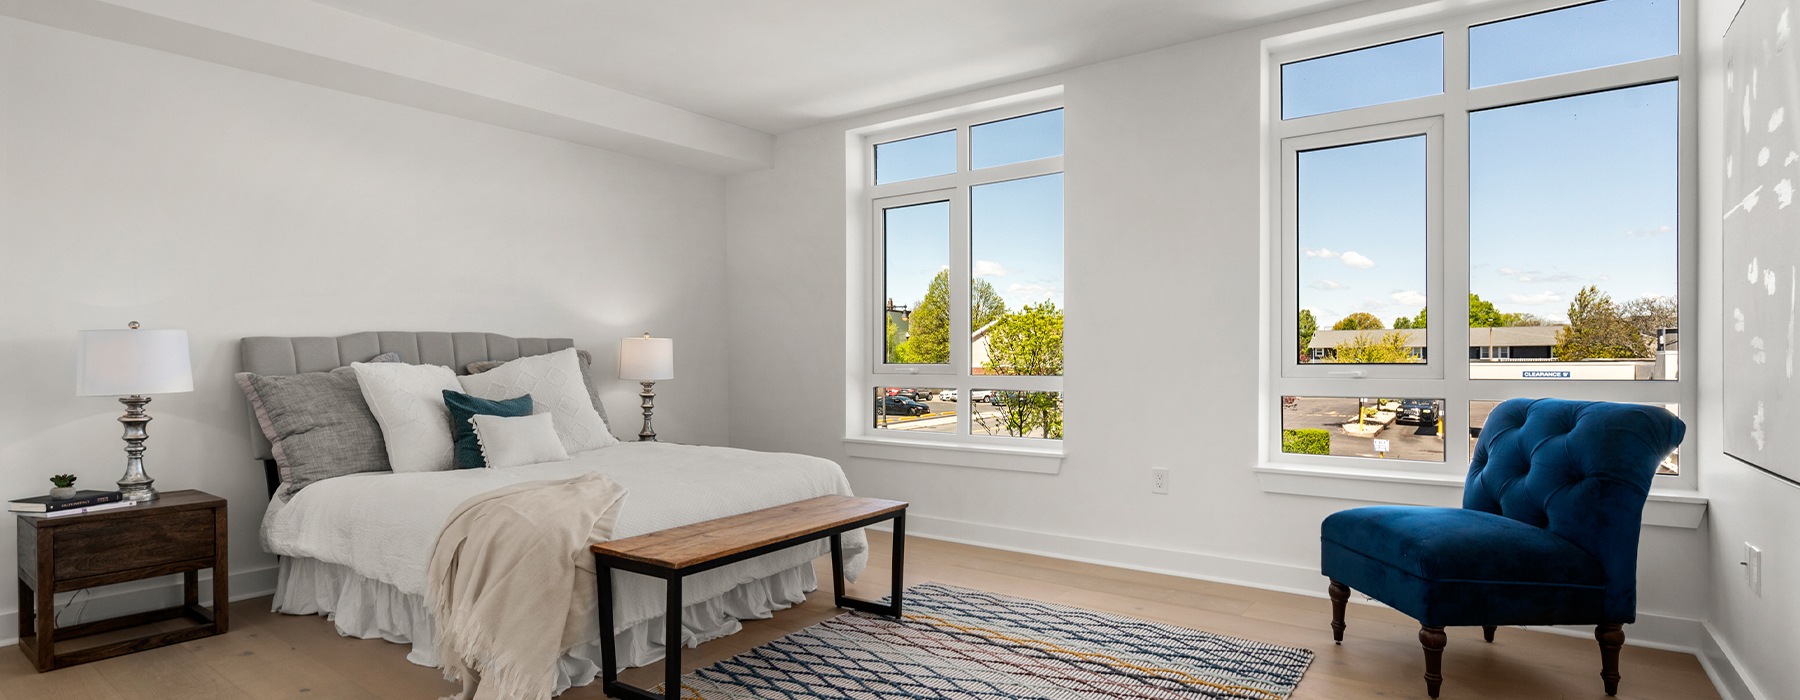 Rendering of a spacious and well lit bedroom with large windows